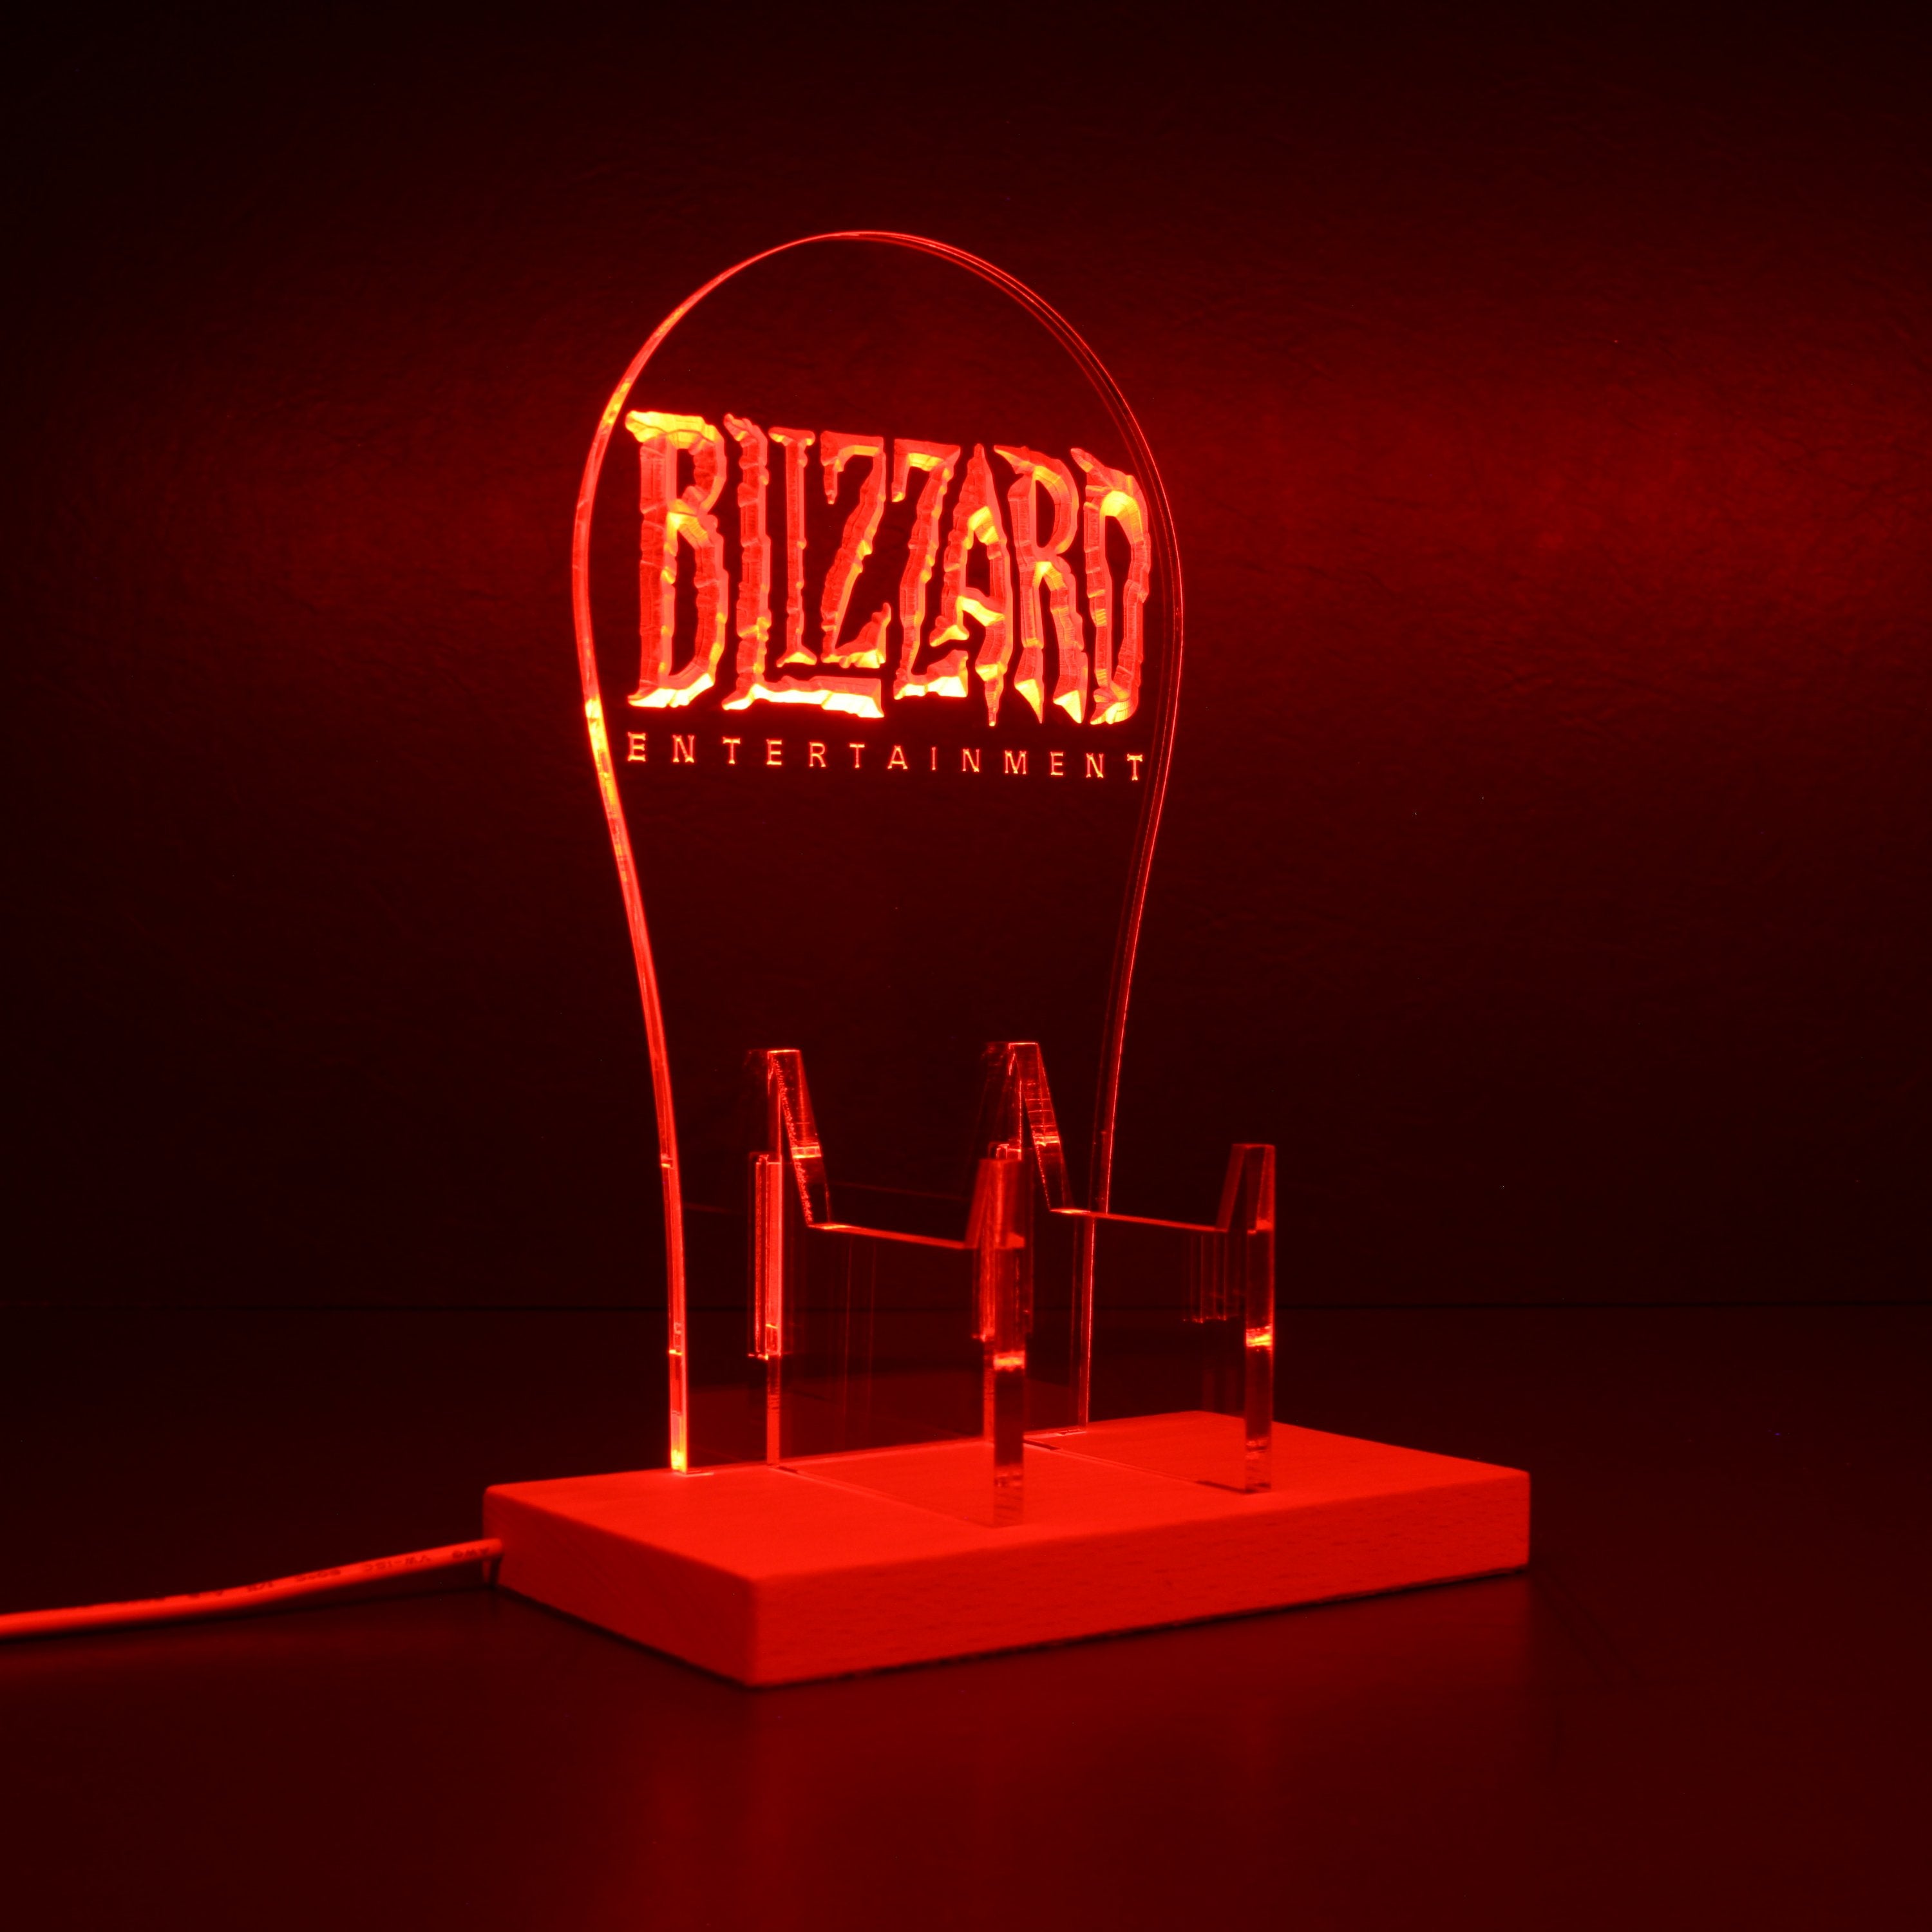 Blizzard RGB LED Gaming Headset Controller Stand